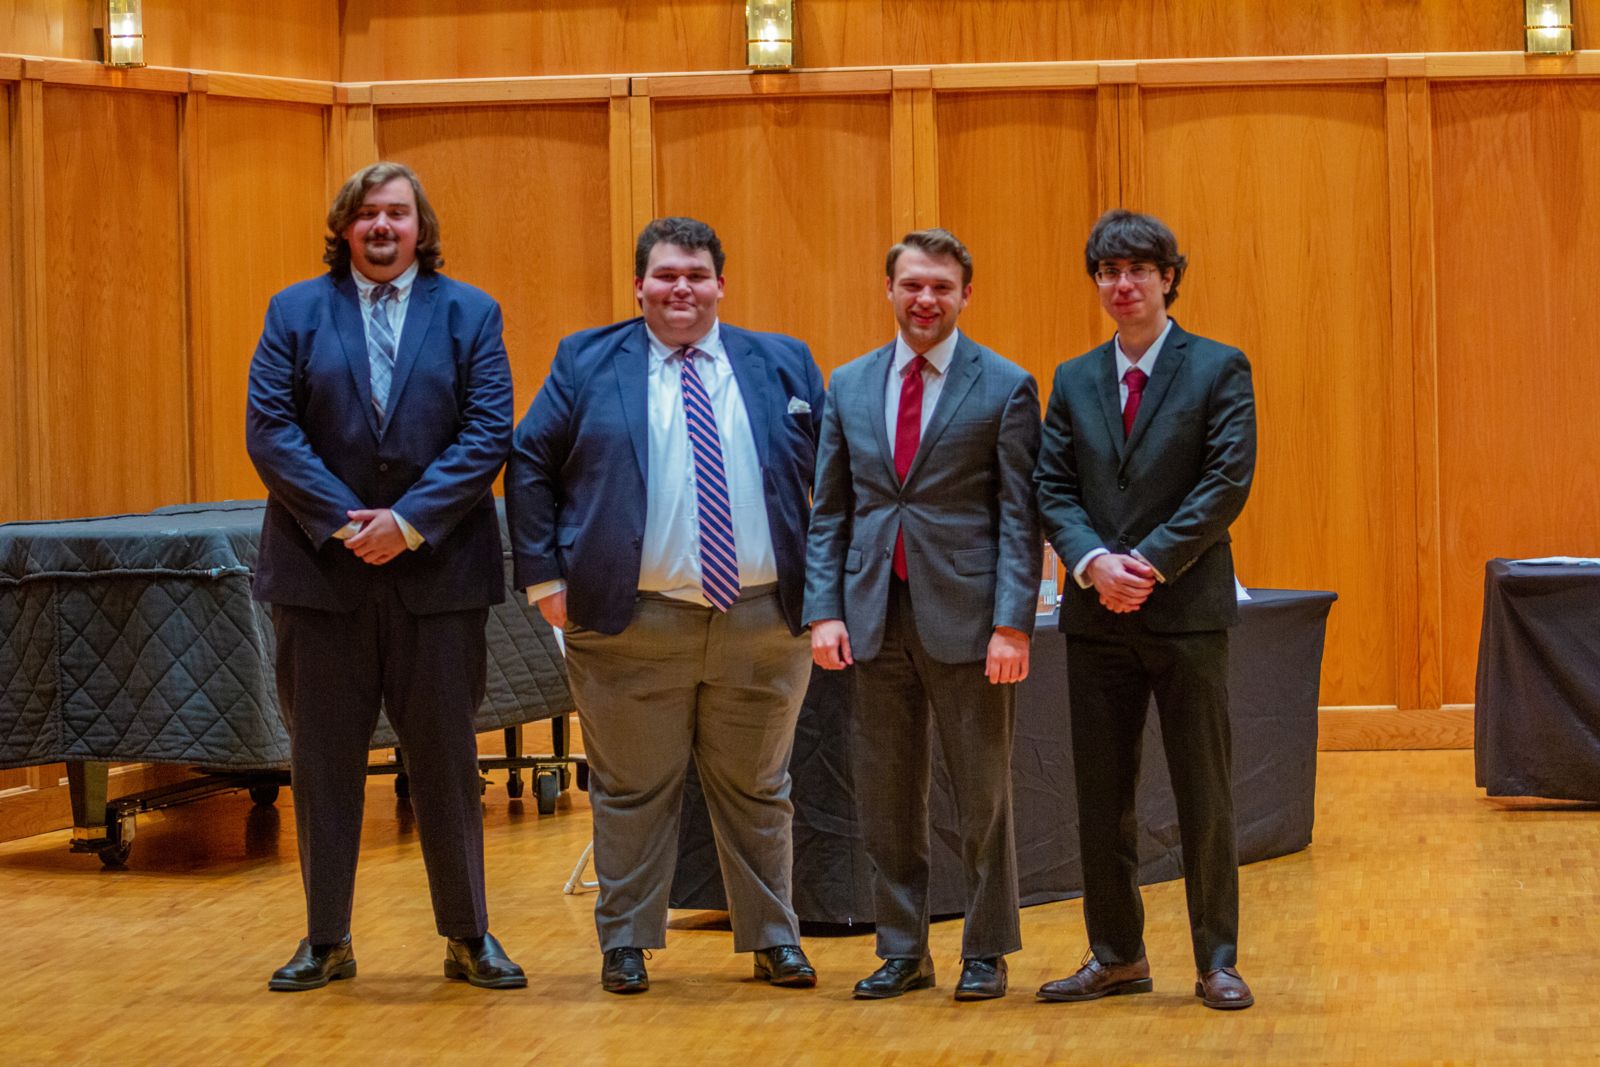 Moot Court finalists Andrew Hollingsworth, Jakob Goodwin, Cooper Smith and Vasilios Antonopoulos  